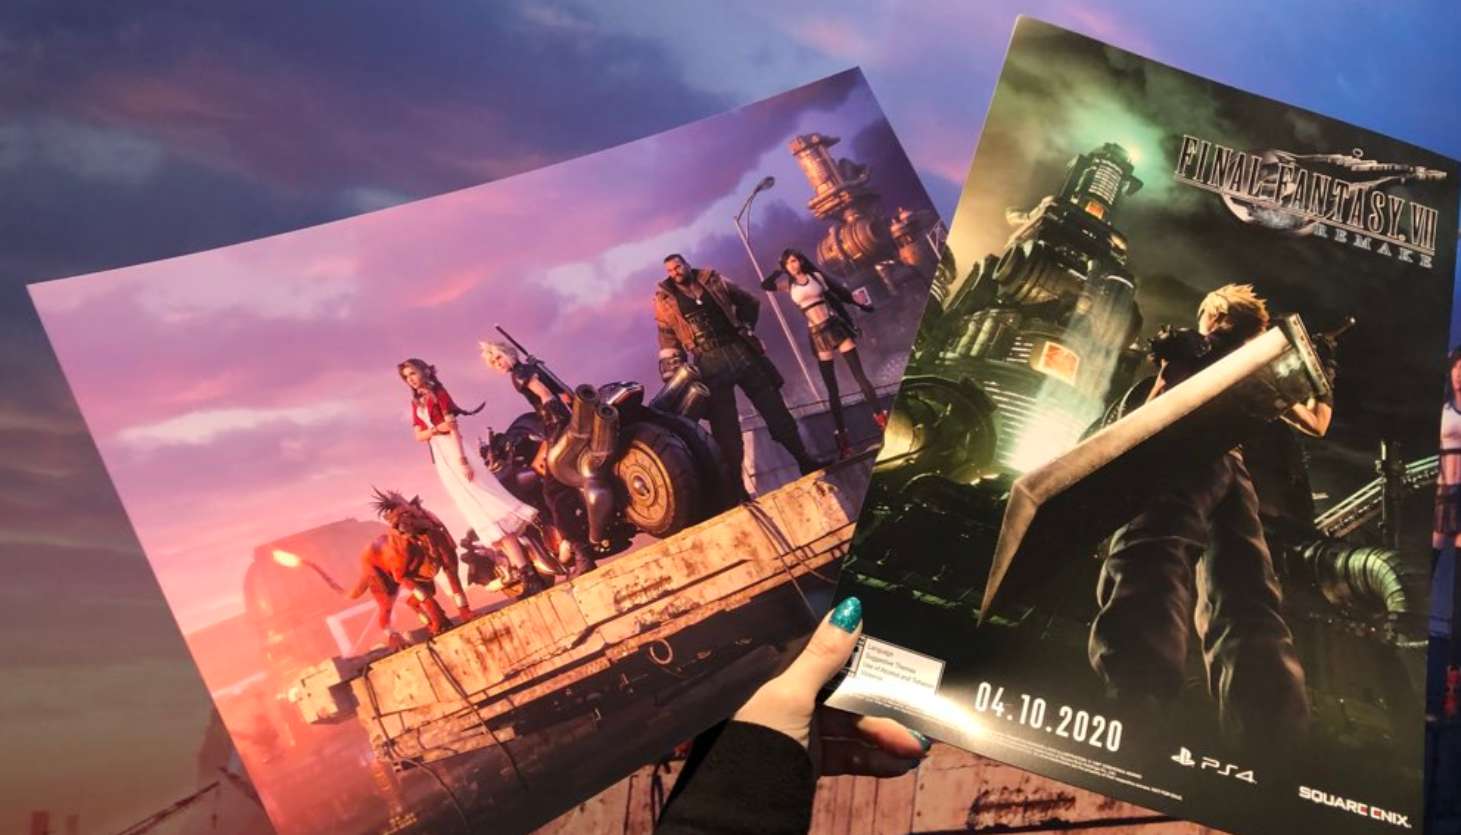 Final Fantasy VII Gives Out Two Posters At Its Booth At PAX East All Weekend, Game’s Voice Cast Was Also On Hand